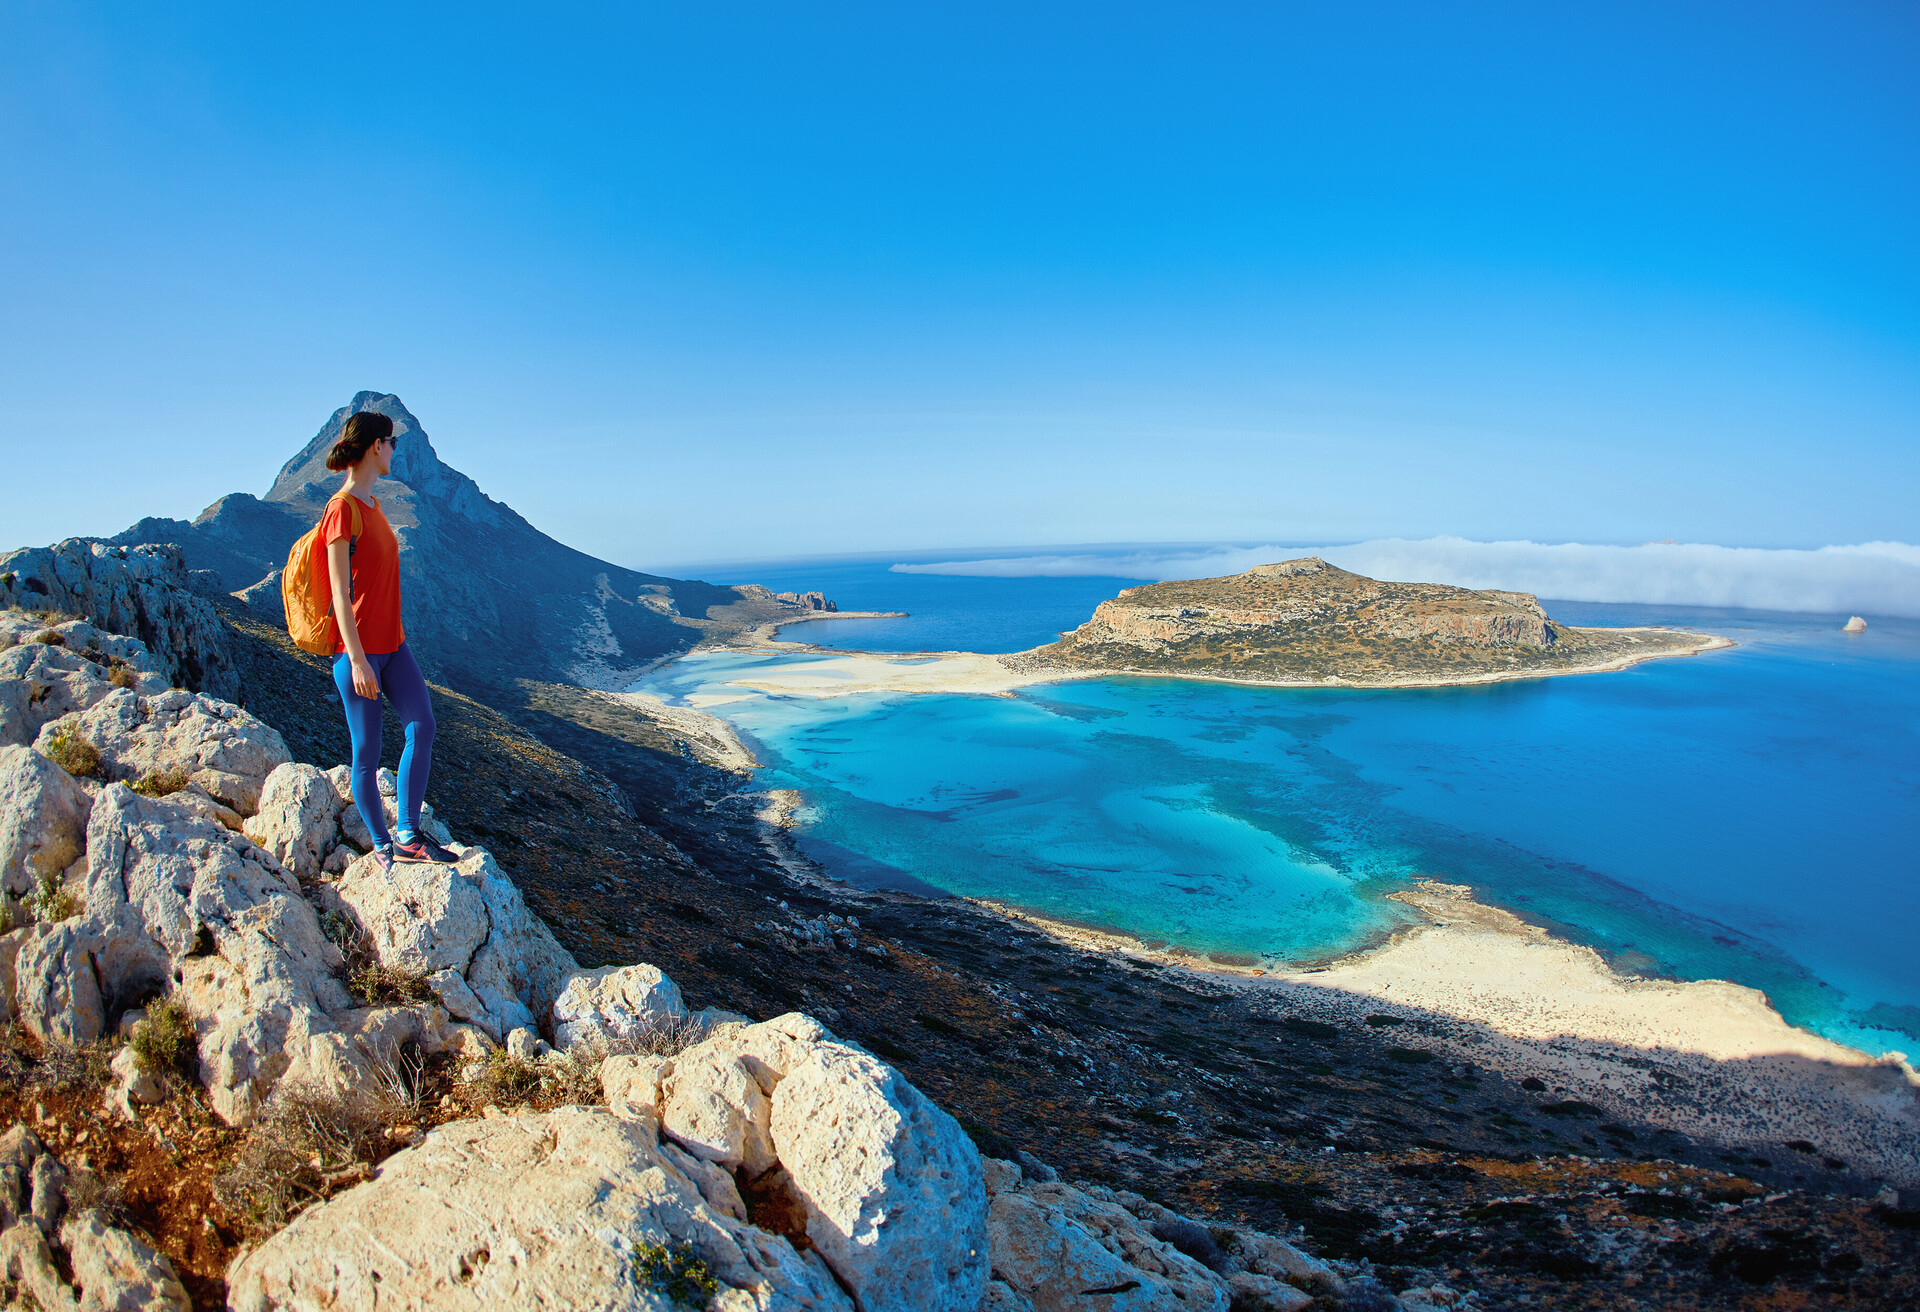 panoramic view on Balos beach, Crete, Greece. Woman, traveller stands on the cliff against sea background; Shutterstock ID 446003965; Brand (KAYAK, Momondo, Any): any